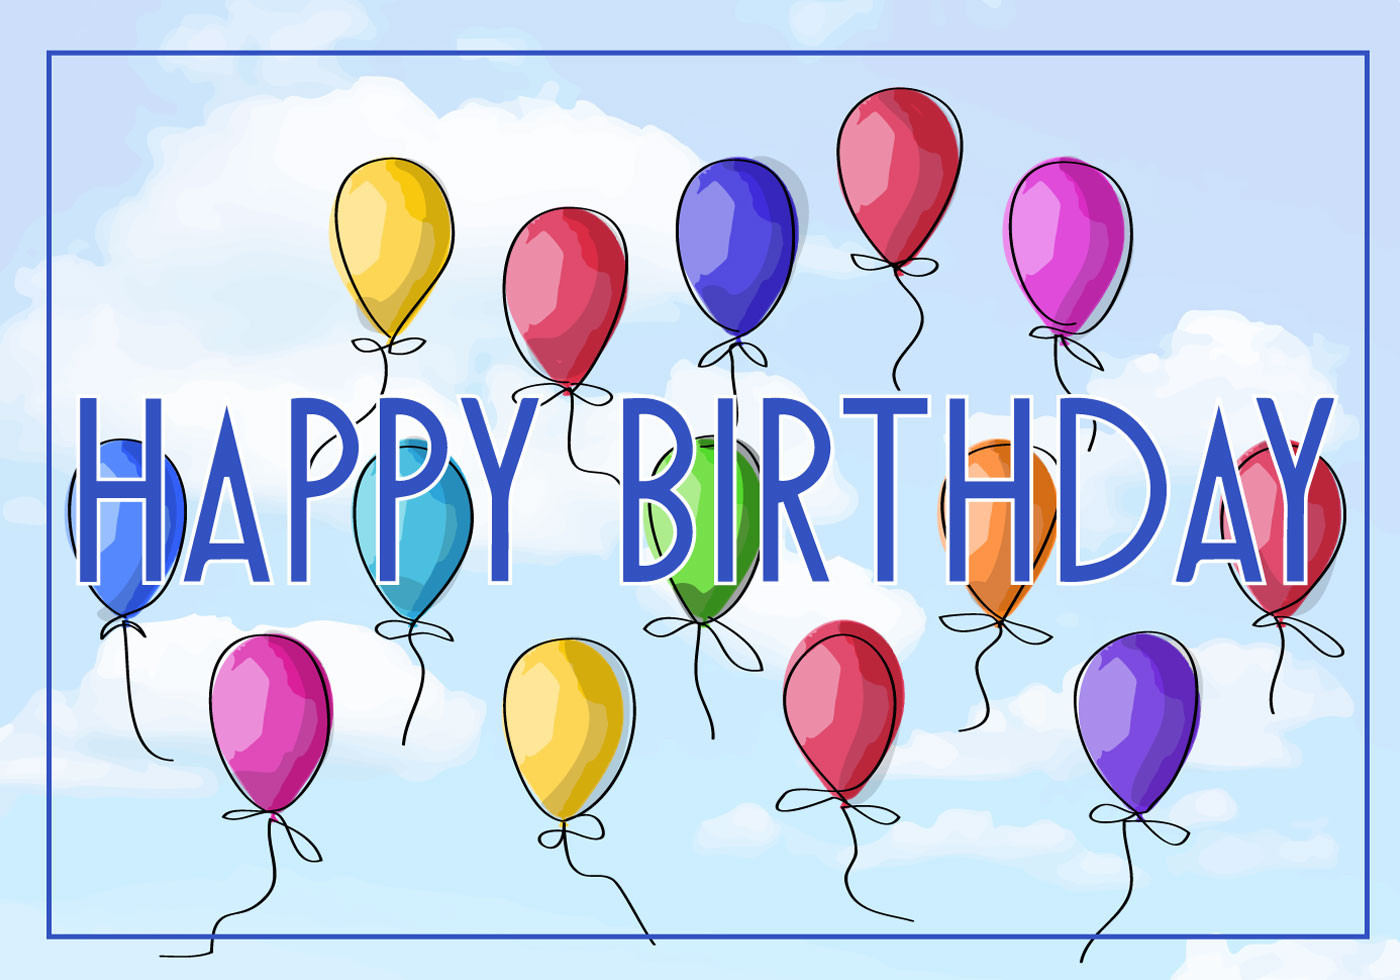 E Birthday Cards Free
 Free Vector Illustration of a Happy Birthday Greeting Card